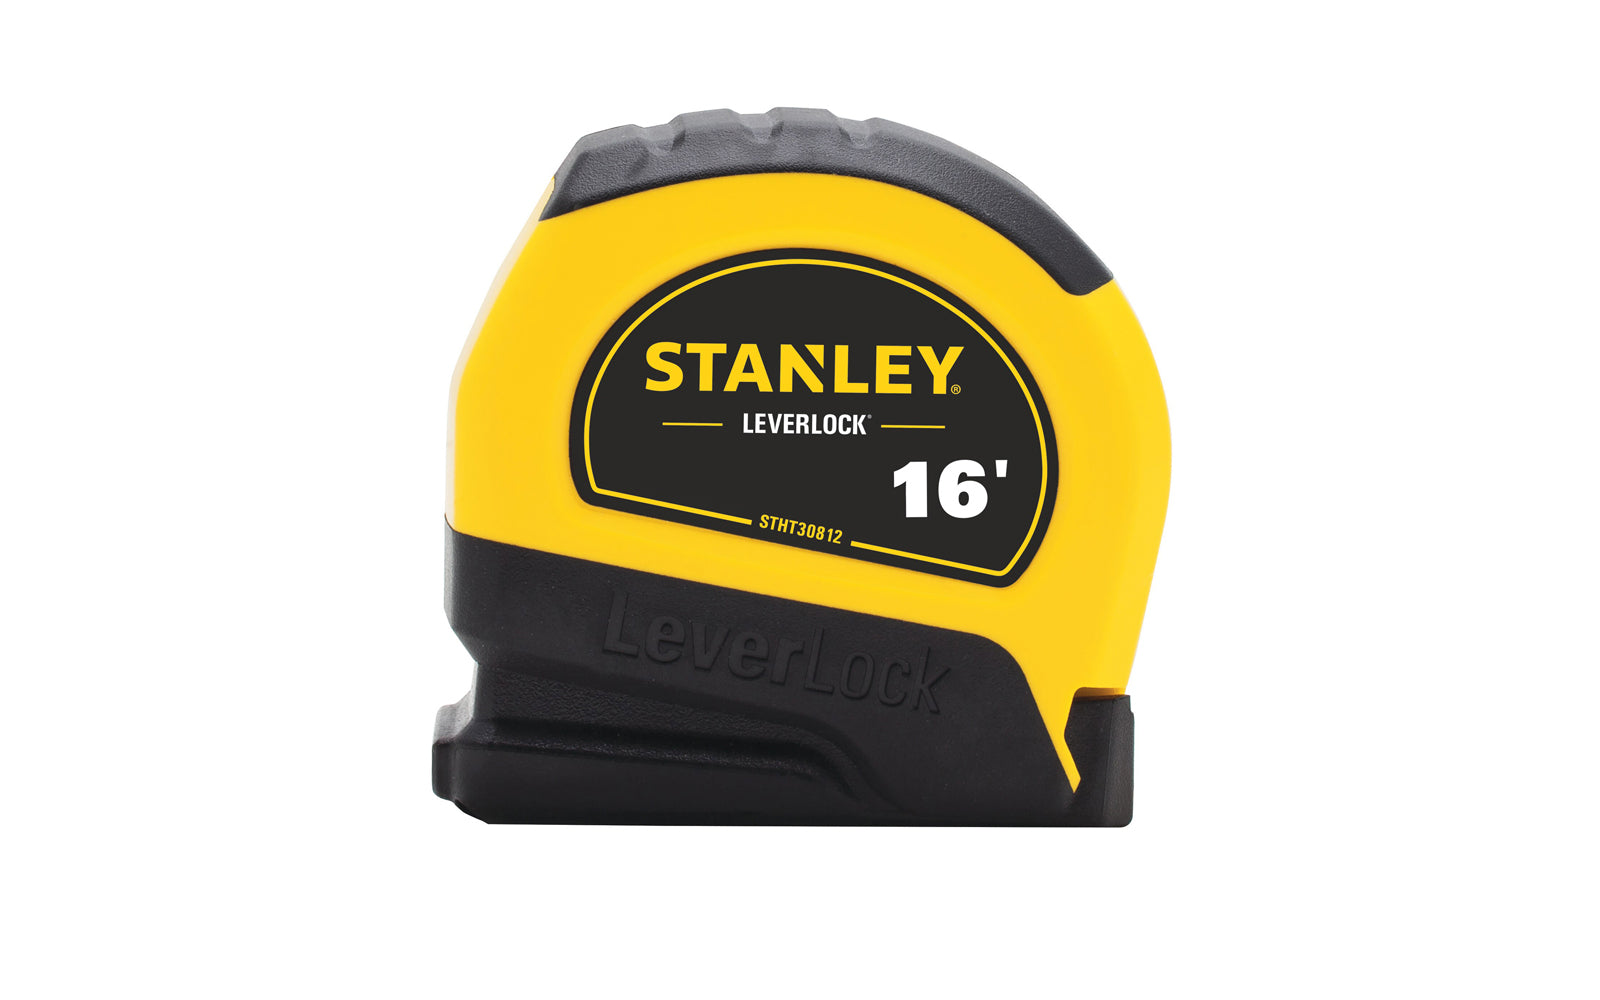 Model STHT30812 · Stanley Tools Leverlock model tape measure - Blade locks automatically. 16' long. 3/4" wide blade - Non-glare blade. Easy to read, comfortable to hold, & built to last, this tape measure is a versatile for all your jobs. The tape measure has a squeeze bottom lever to retract the blade. 076174308129